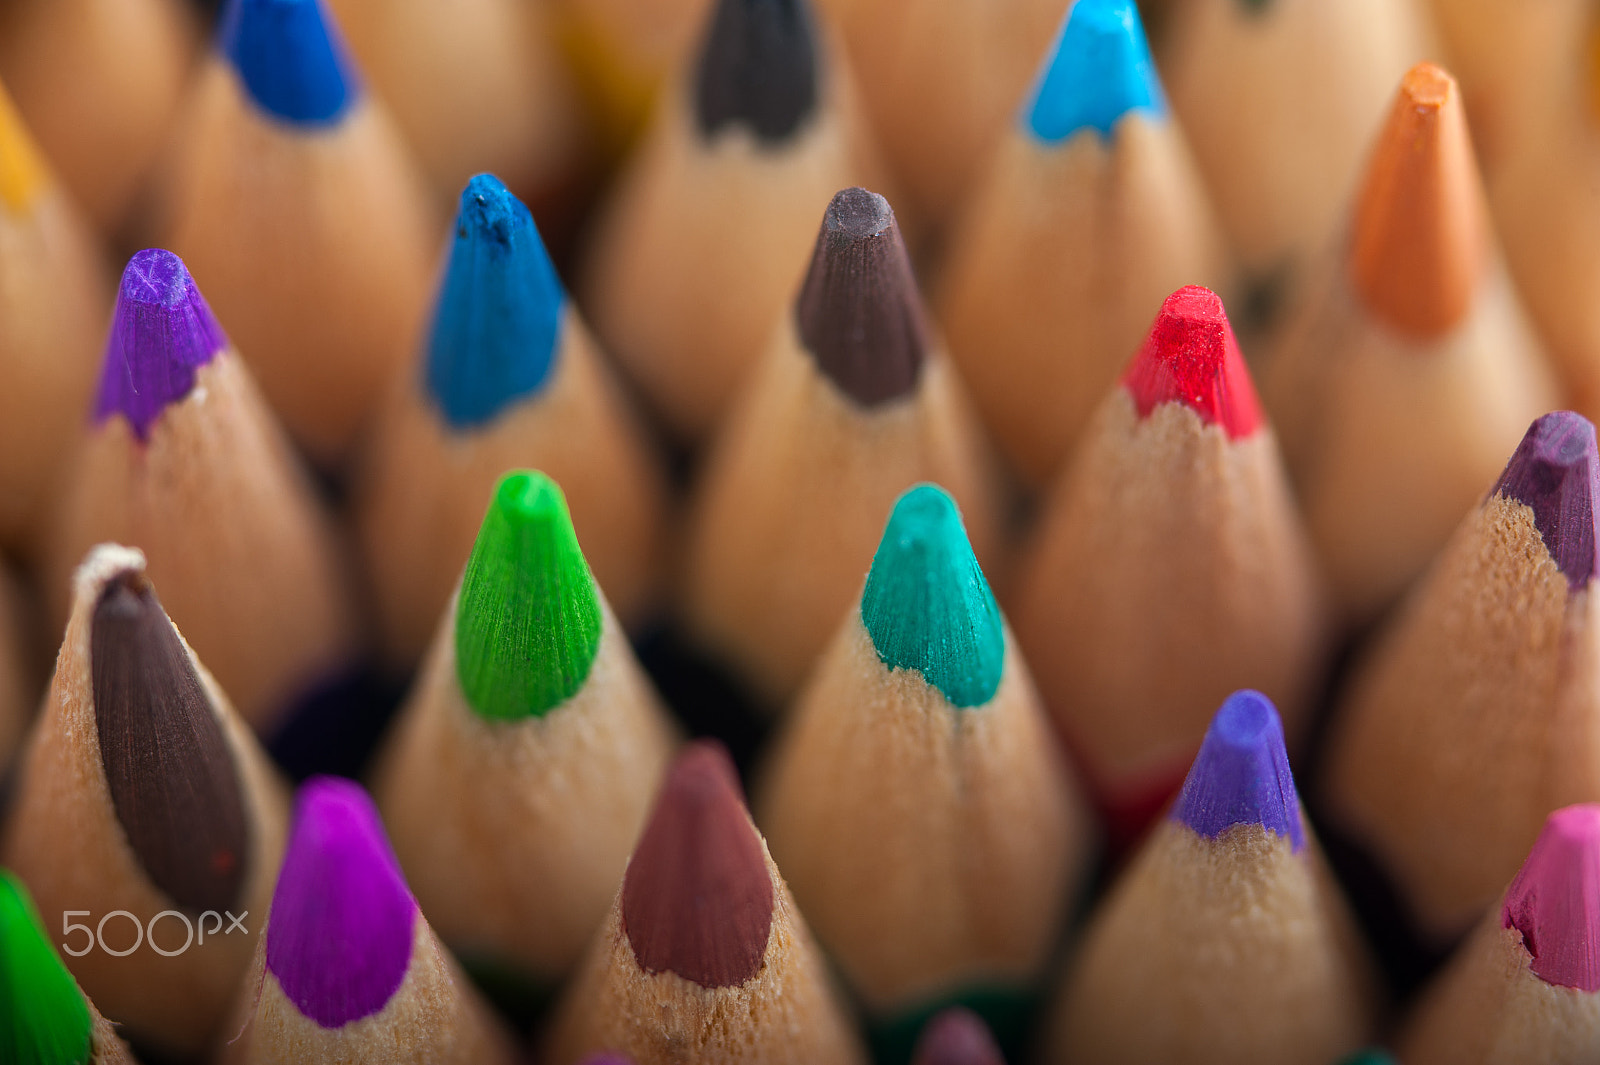 Nikon D700 + AF Micro-Nikkor 105mm f/2.8 sample photo. Group of multicolored wooden crayons photography